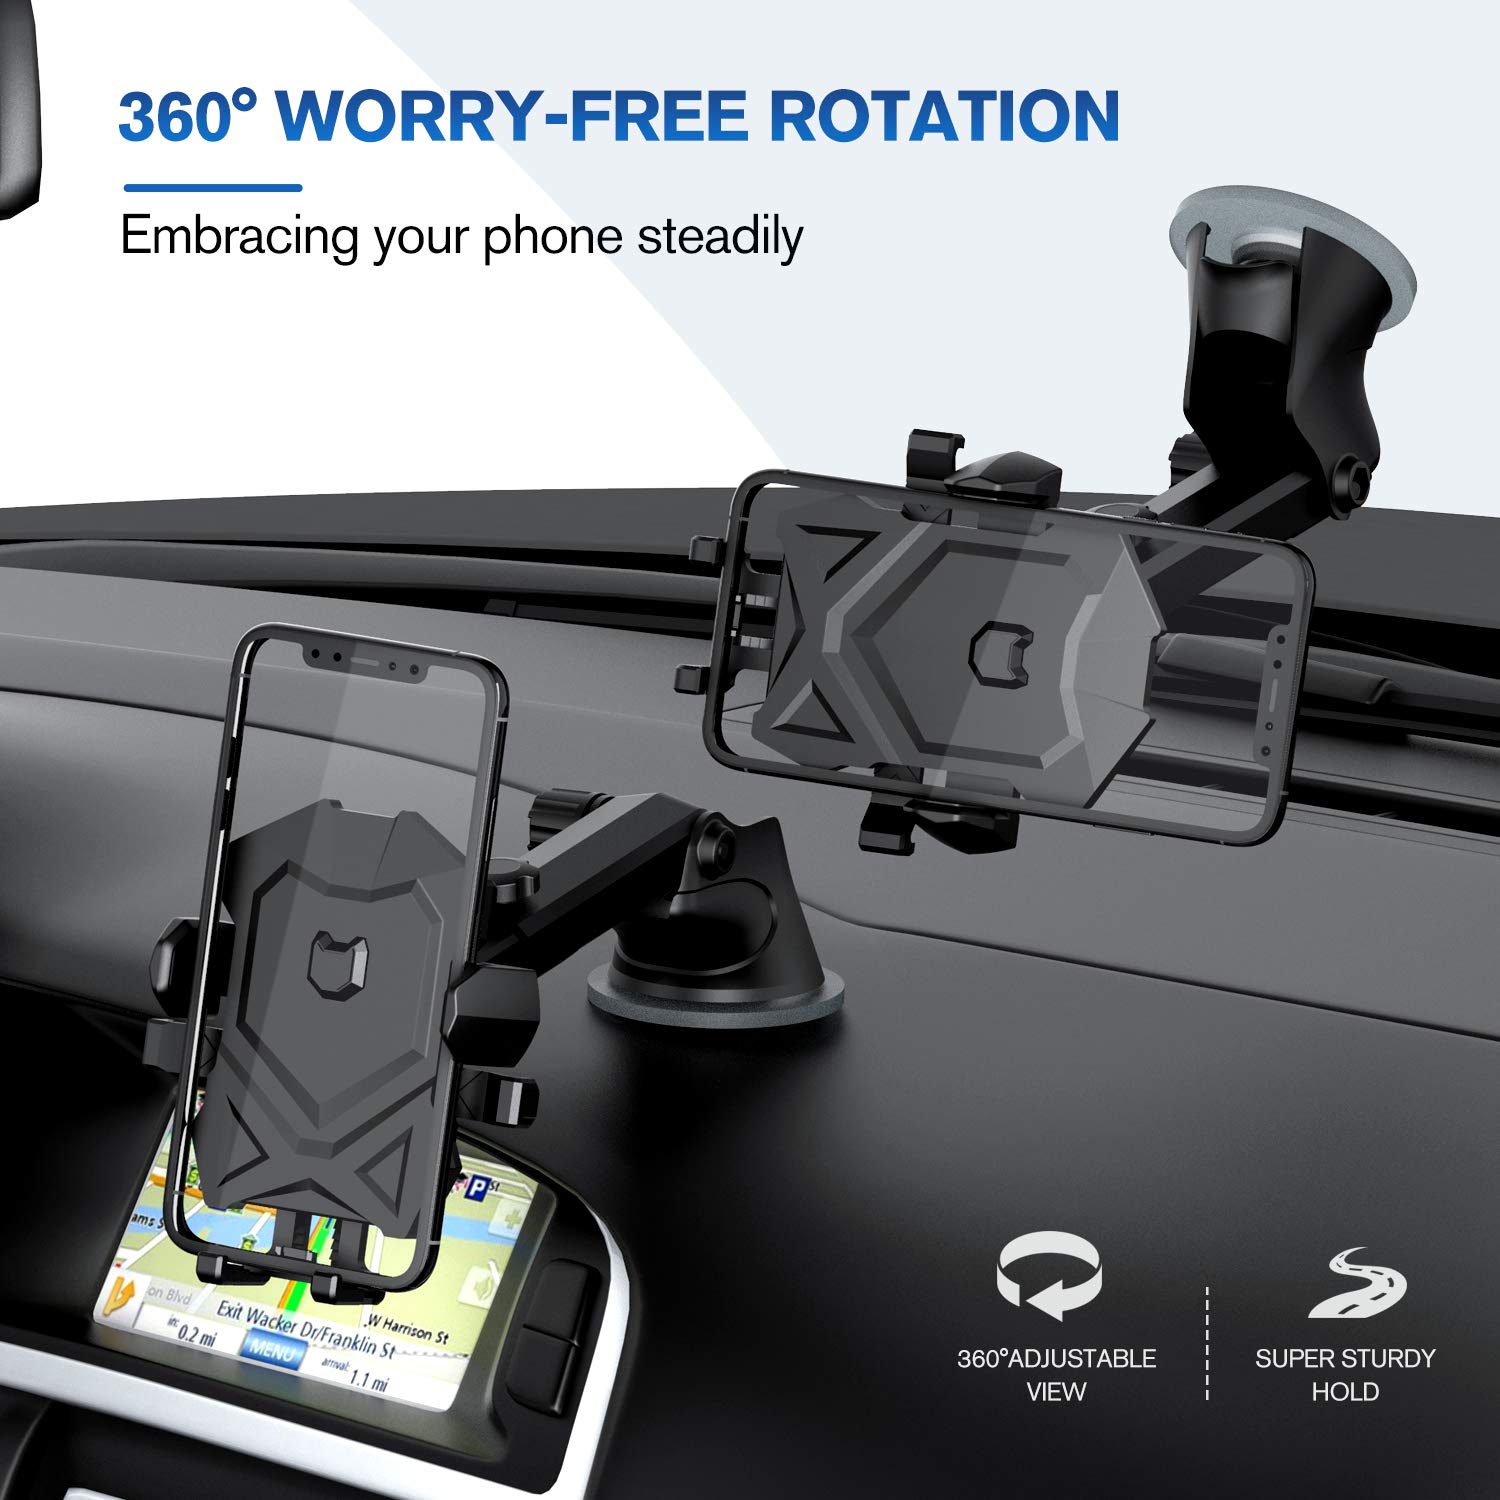 Phone Holder for Car,Universal Long Neck Car Mount Holder Compatible with iPhone Xs XS Max XR X 8 8 Plus 7 7 Plus S10 S9 S8 S7 S6 LG and More